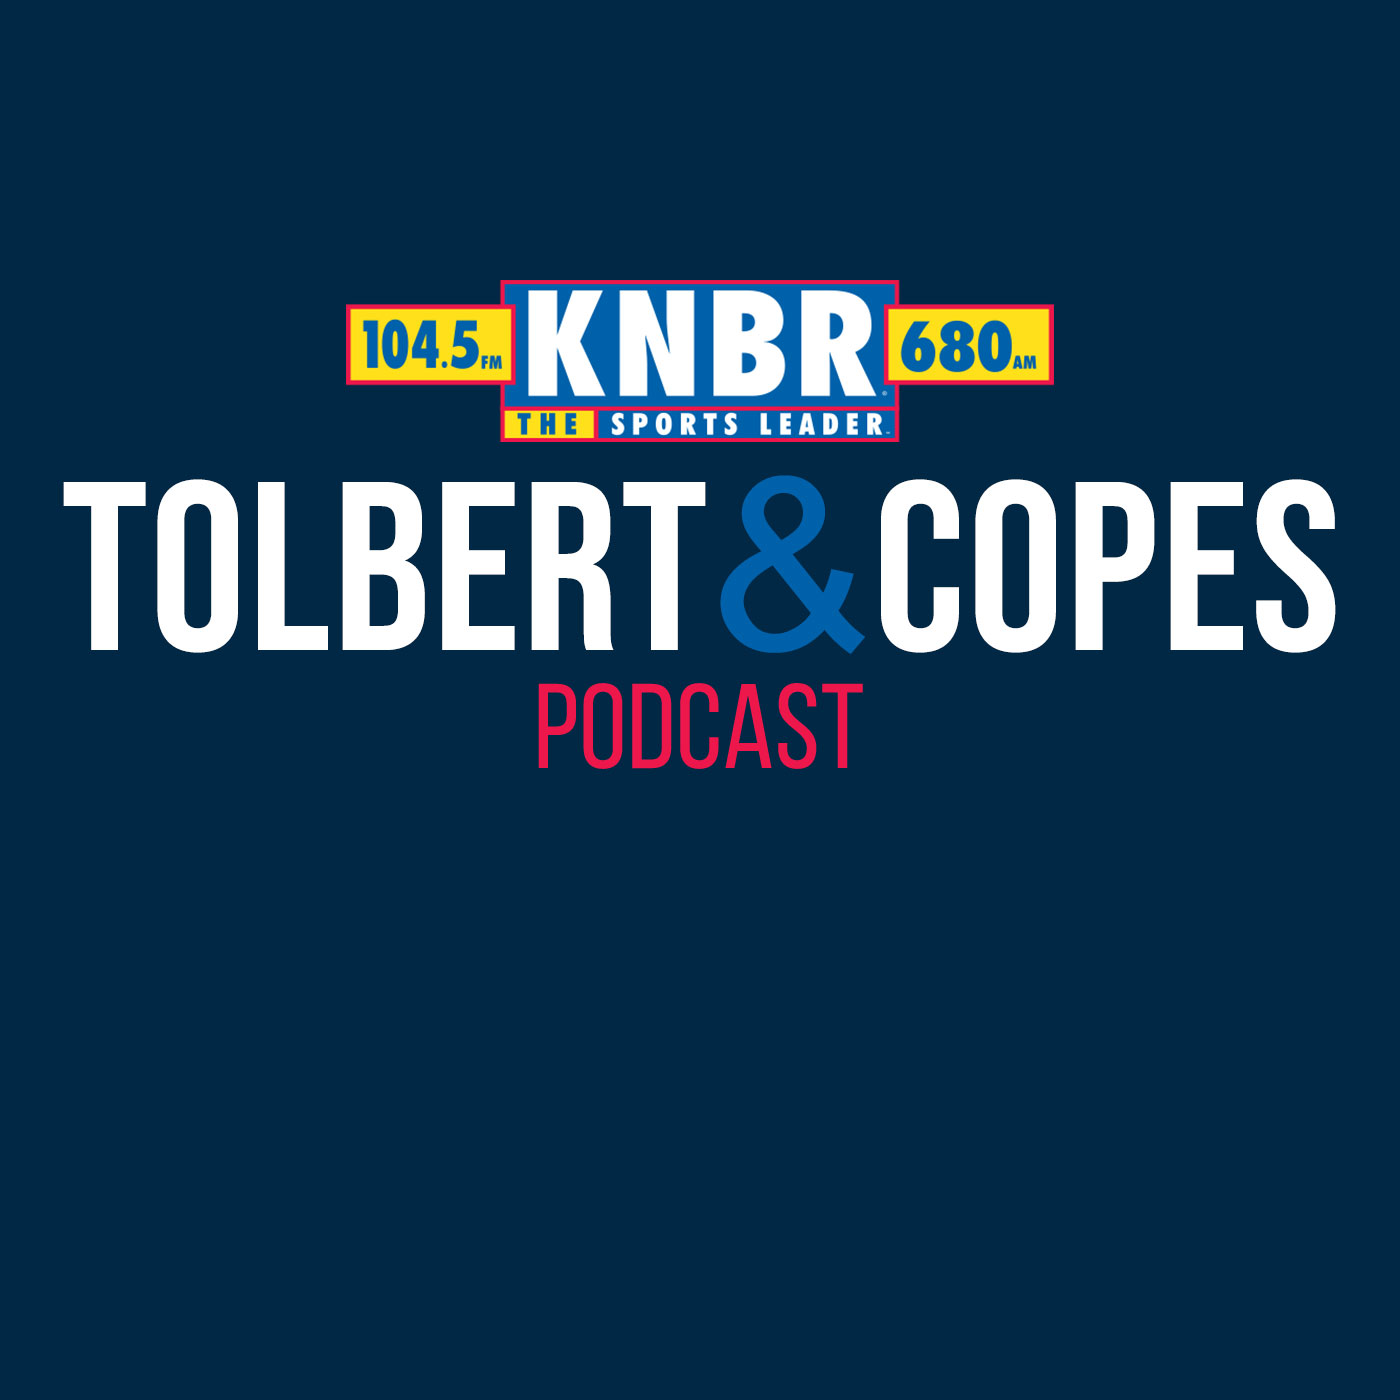 4-24 Jim Petersen joins Tolbert & Copes to discuss the NBA playoffs